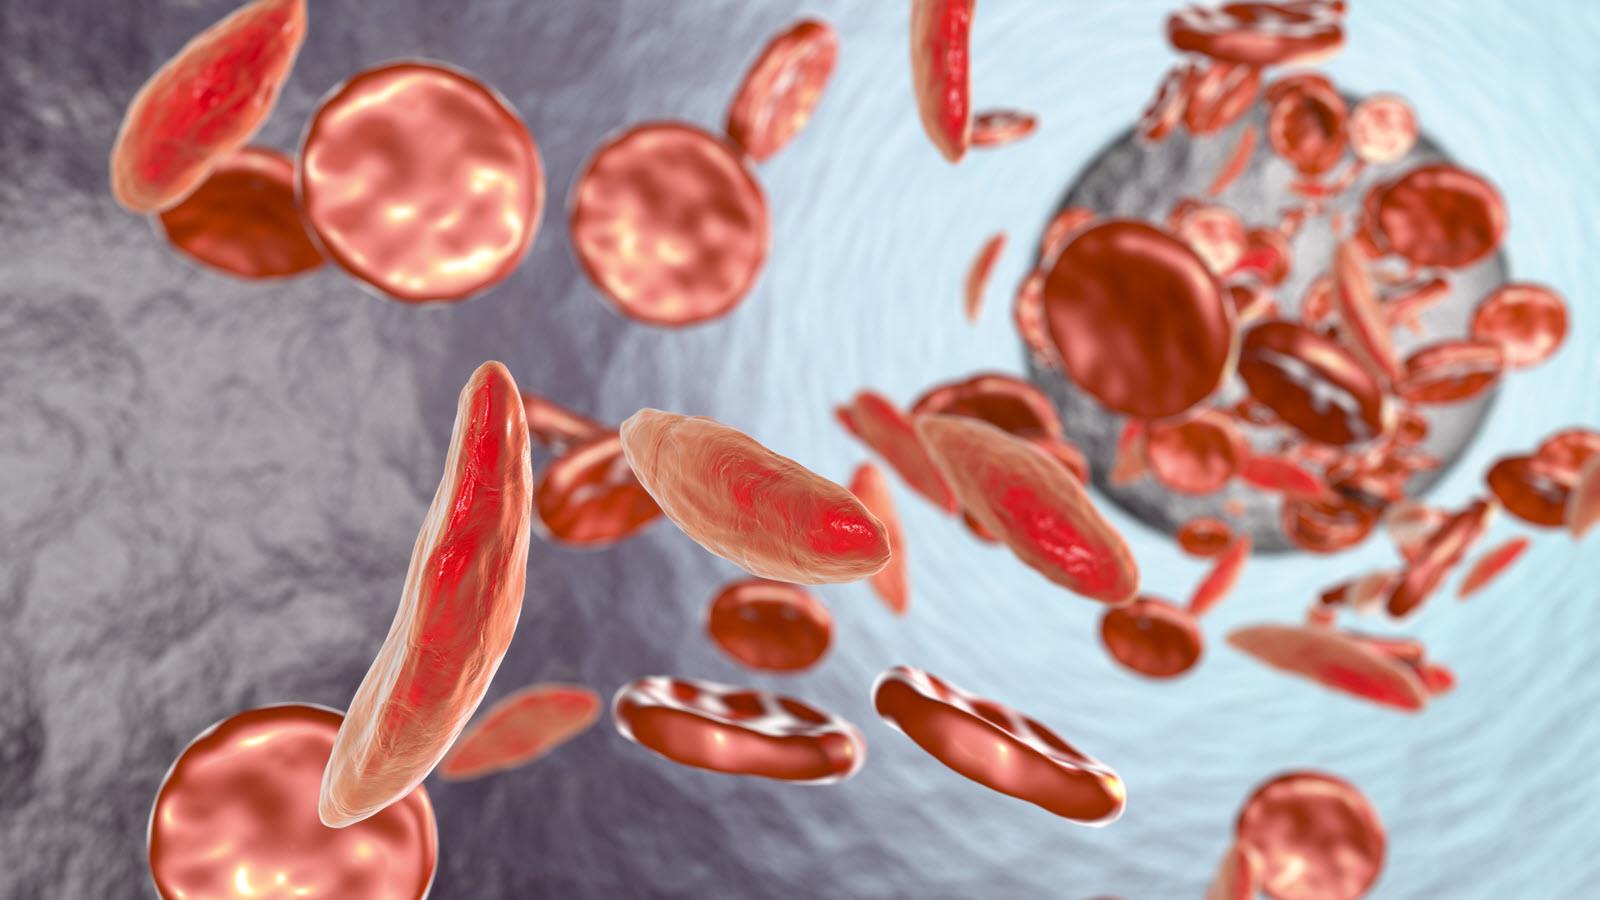 illustration of red sickle cells in the blood stream